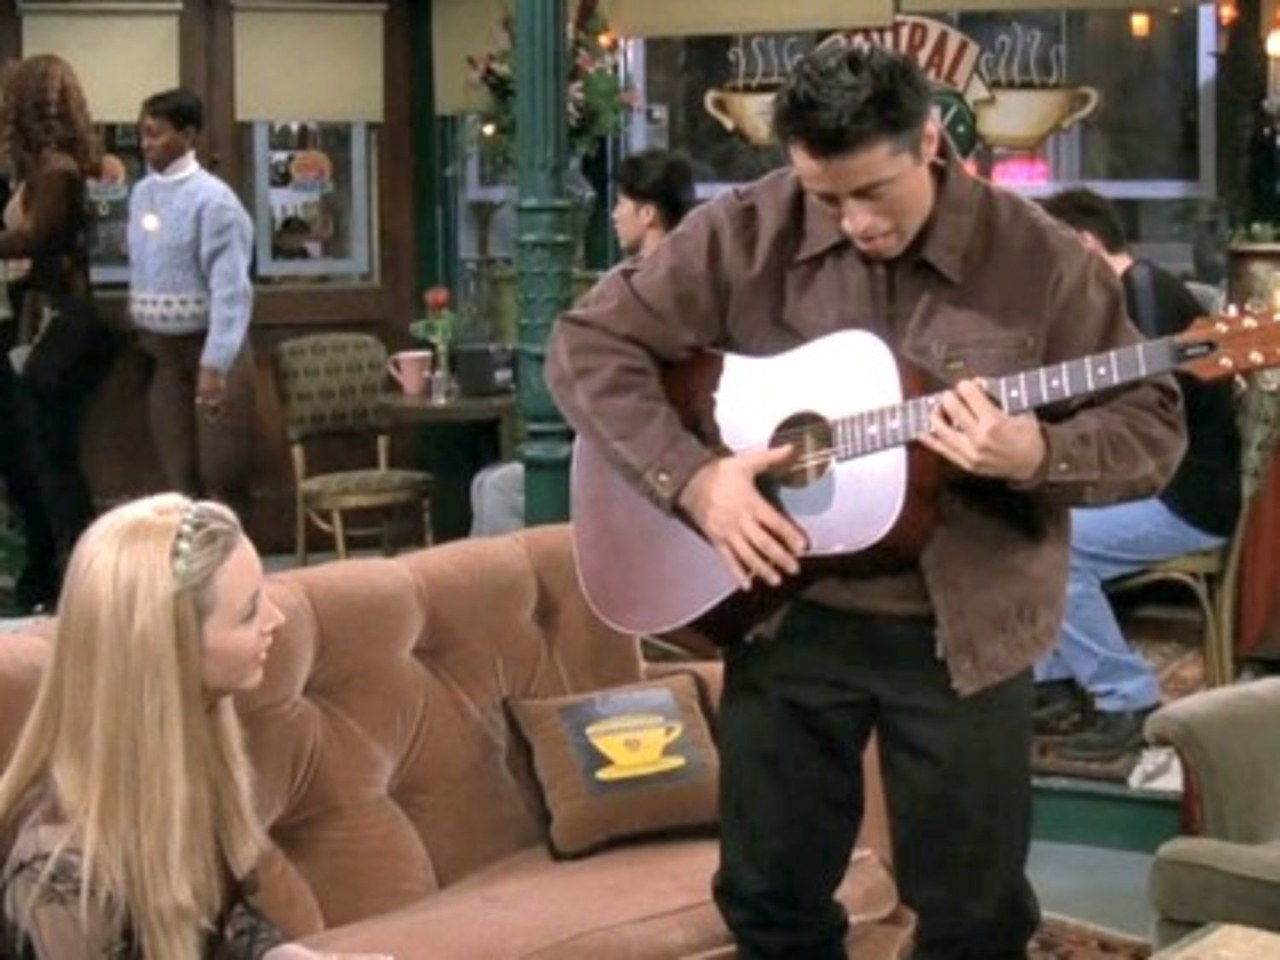 amigos phoebe joey with guitar